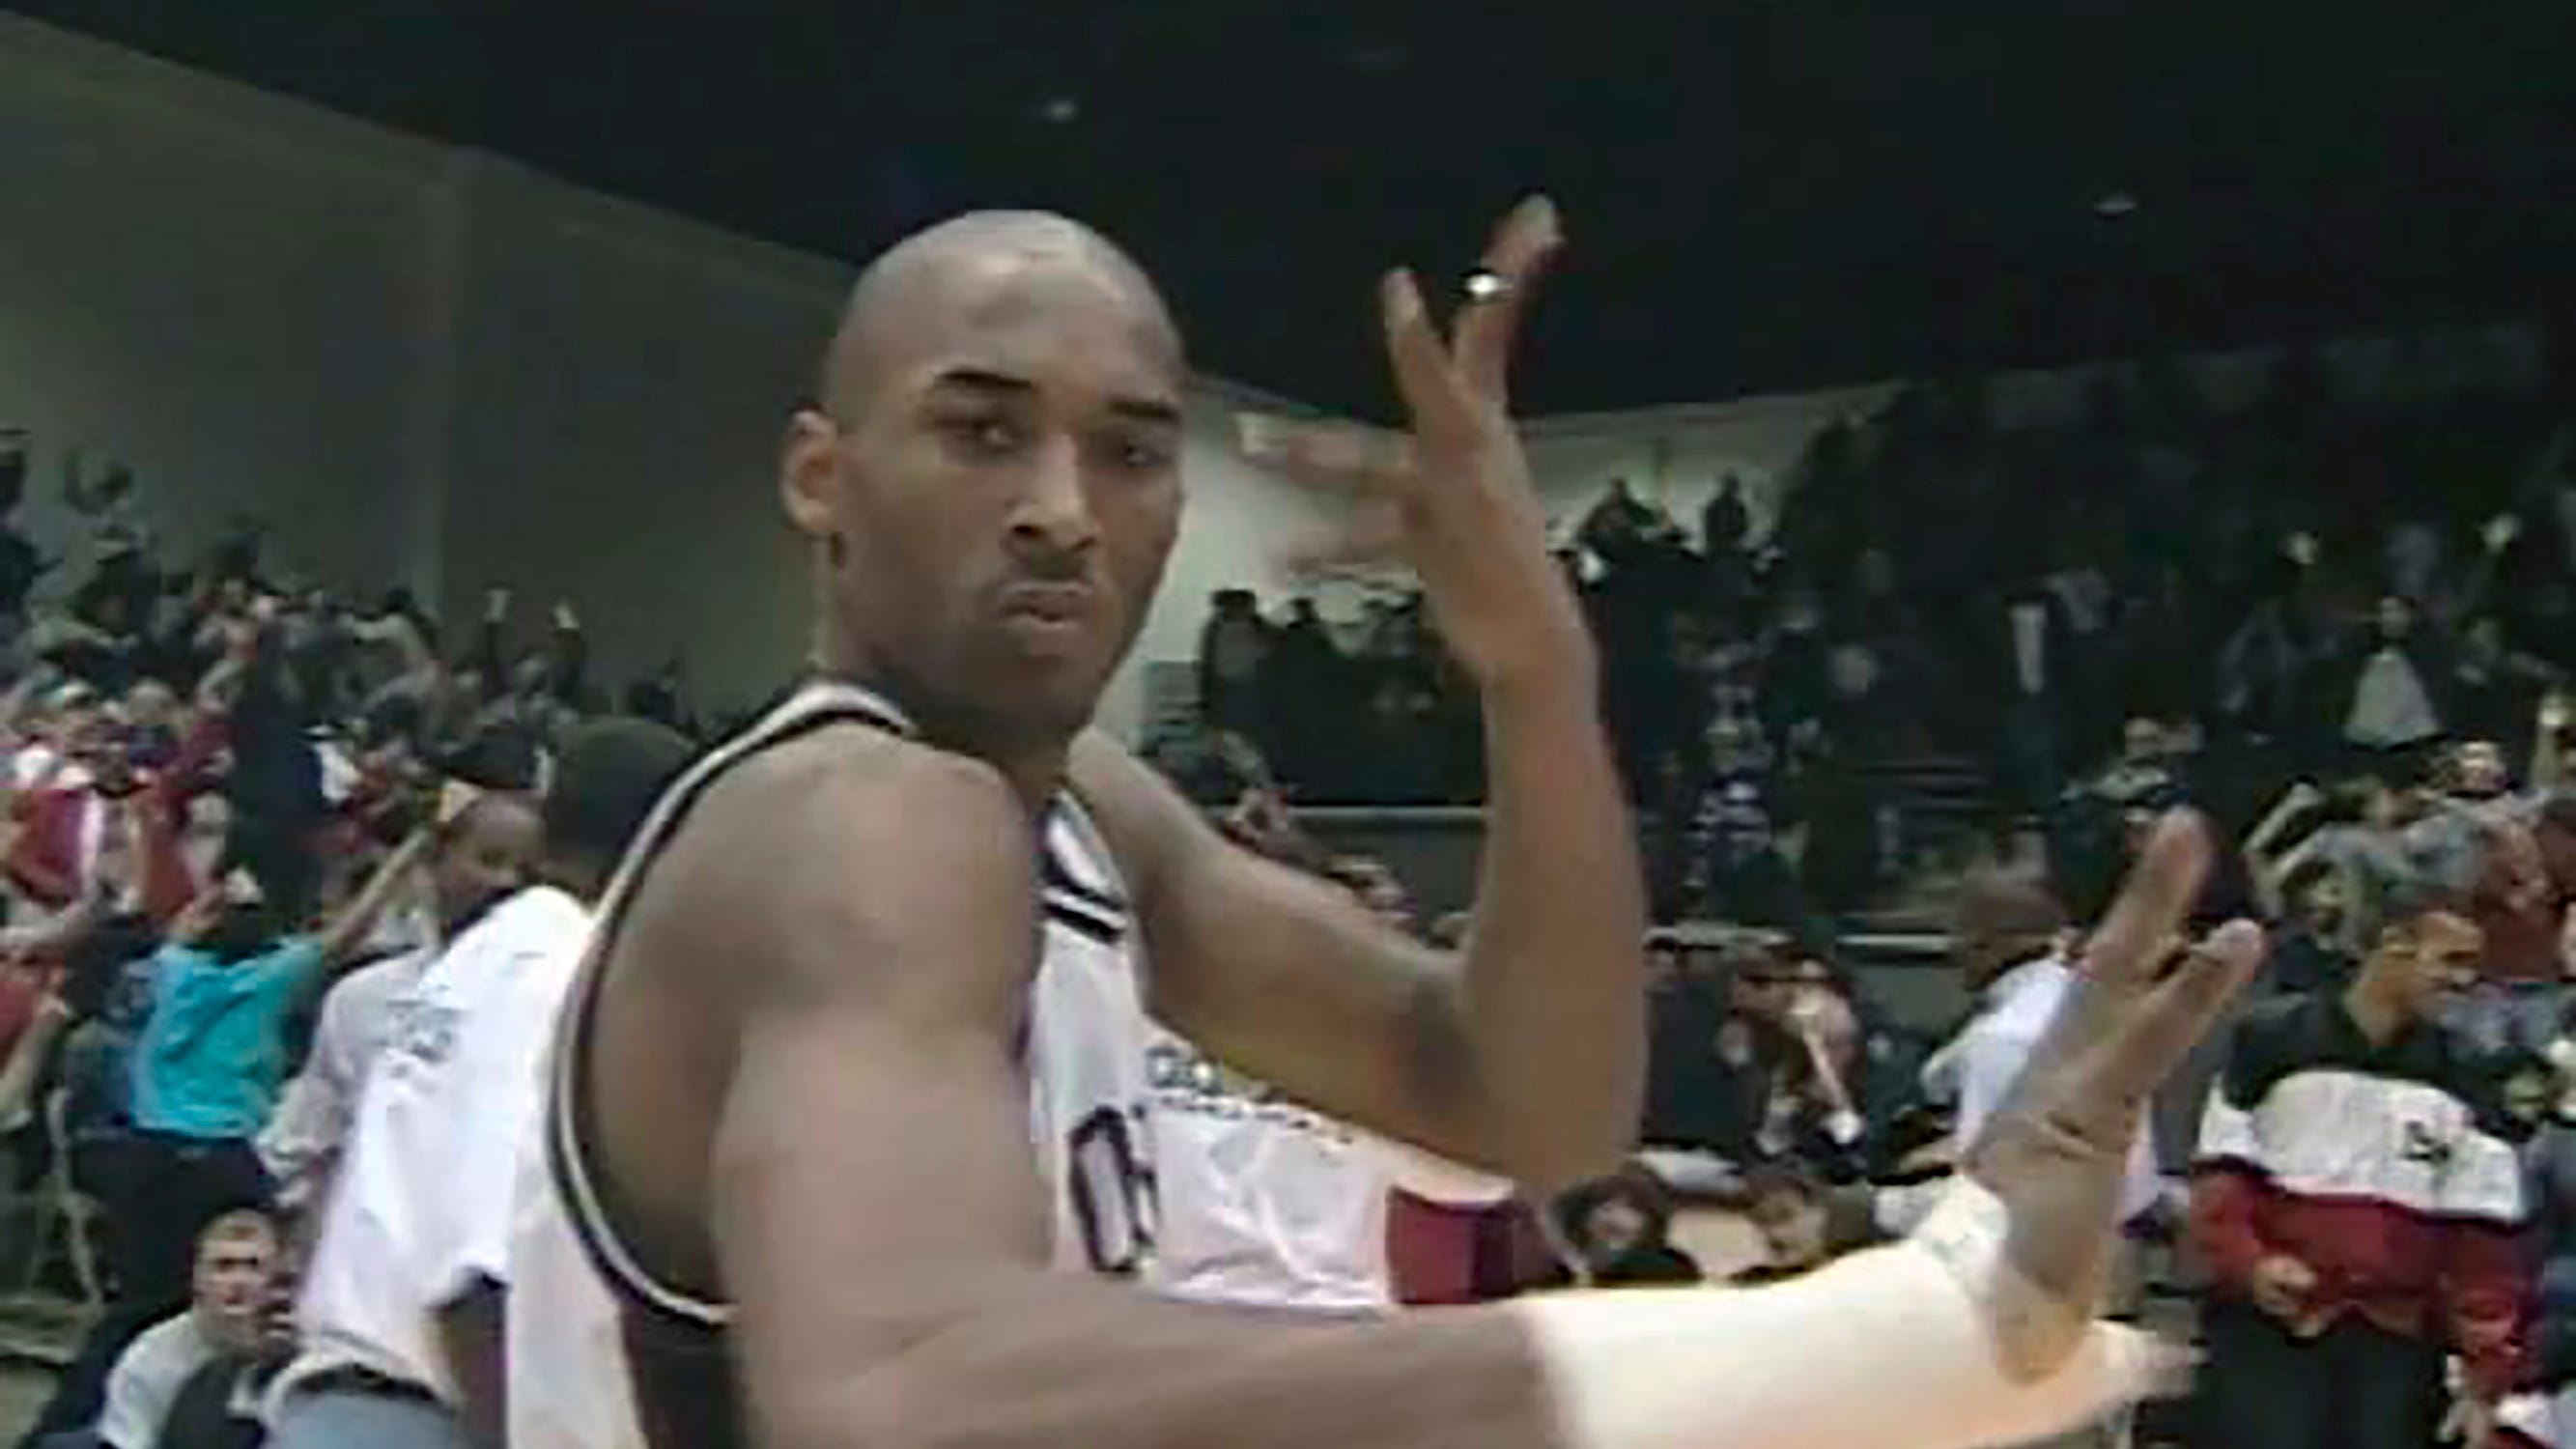 Kobe Bryant High School Footage To Be Auctioned On July 23 